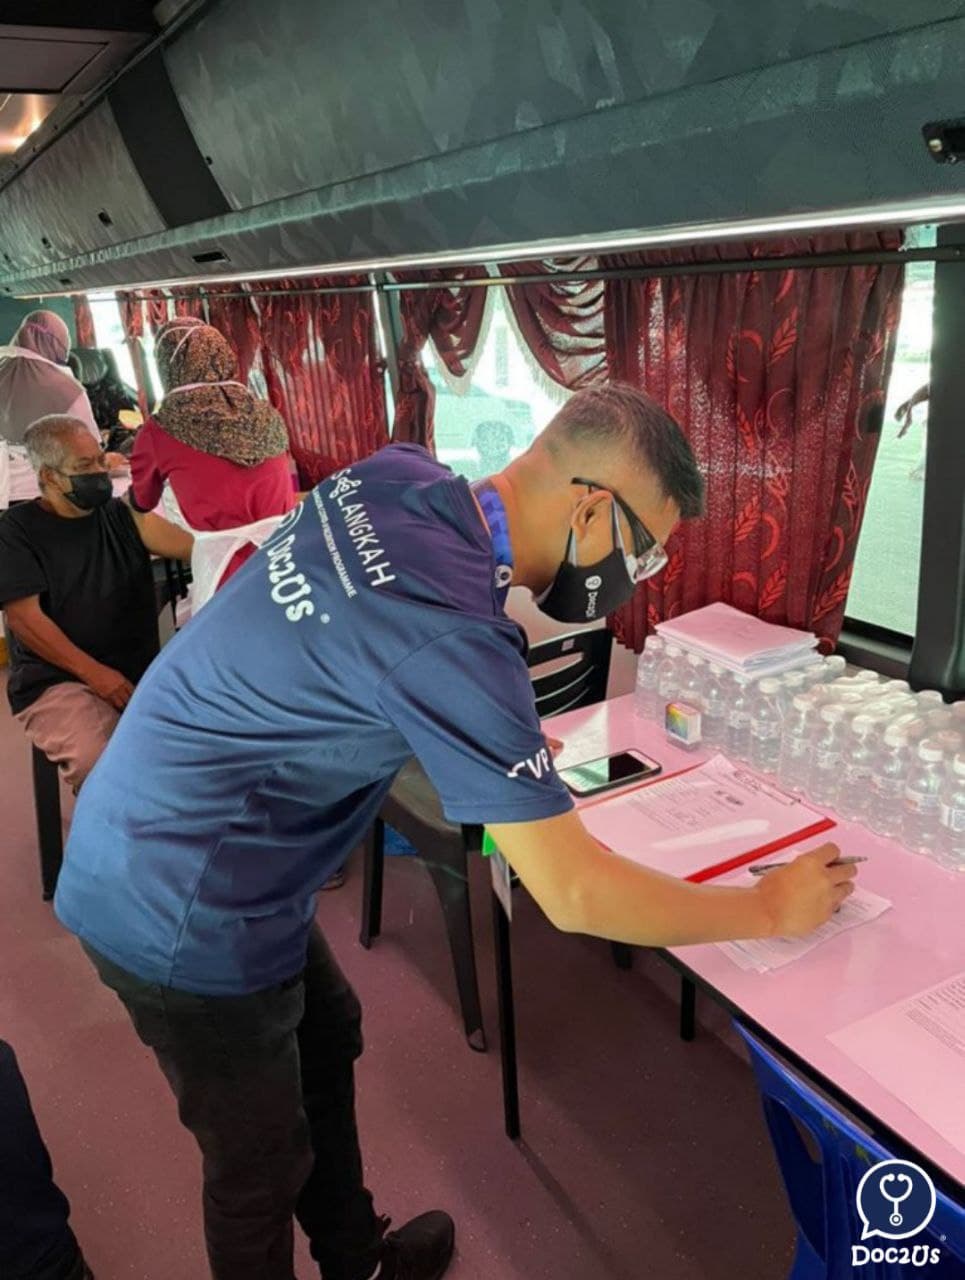 2nd day of SELVAX Mobile Vaccination Programme 🚌💉
We are out in two locations today!
📍Second - our big bus at Kompleks Muhibbah Tanjung Sepat 
#DemiNegara #DemiMalaysia #Cucuklah